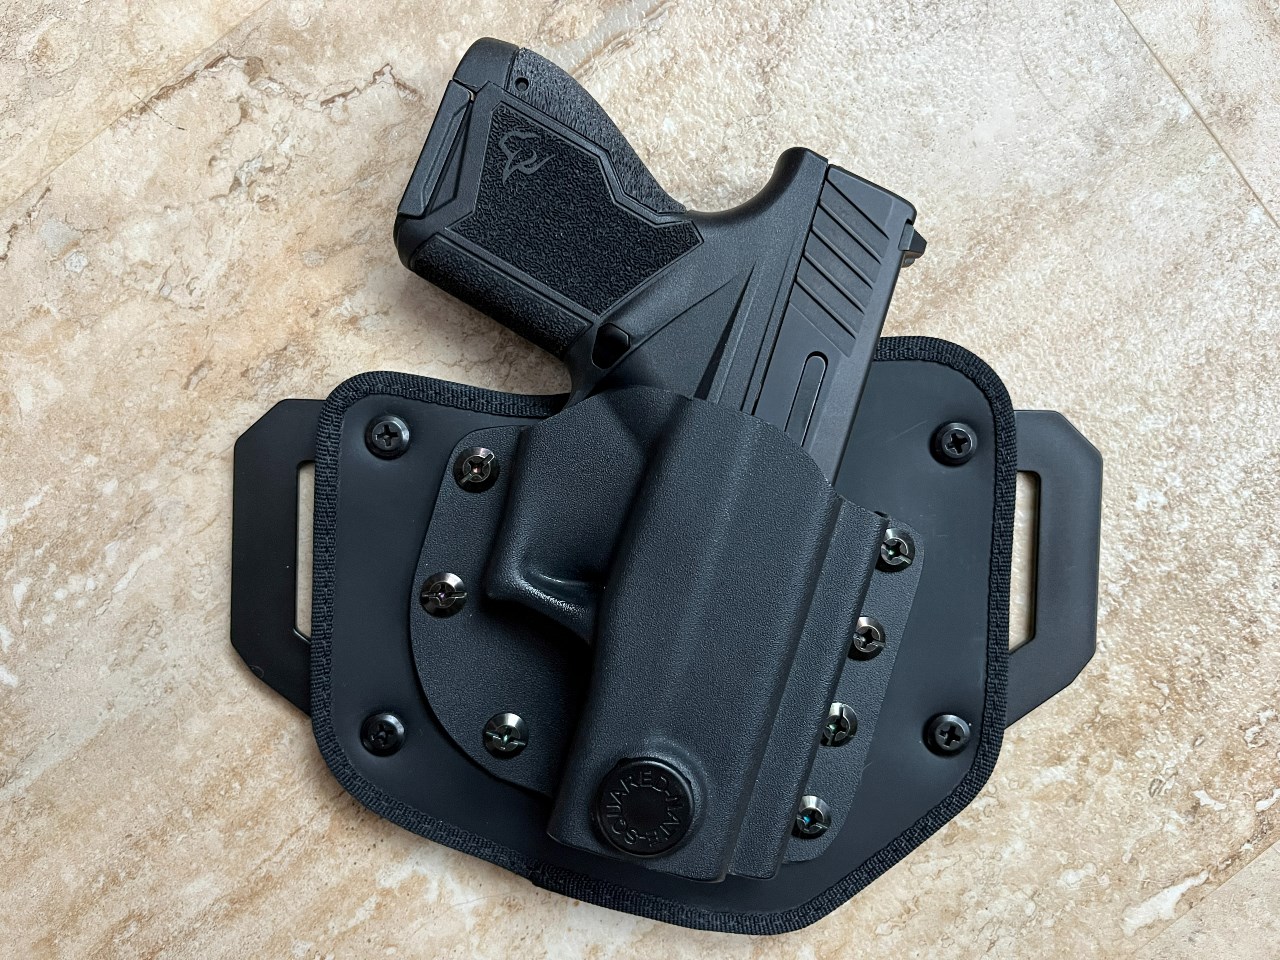 N8 Tactical Pro-Lock G2 holster